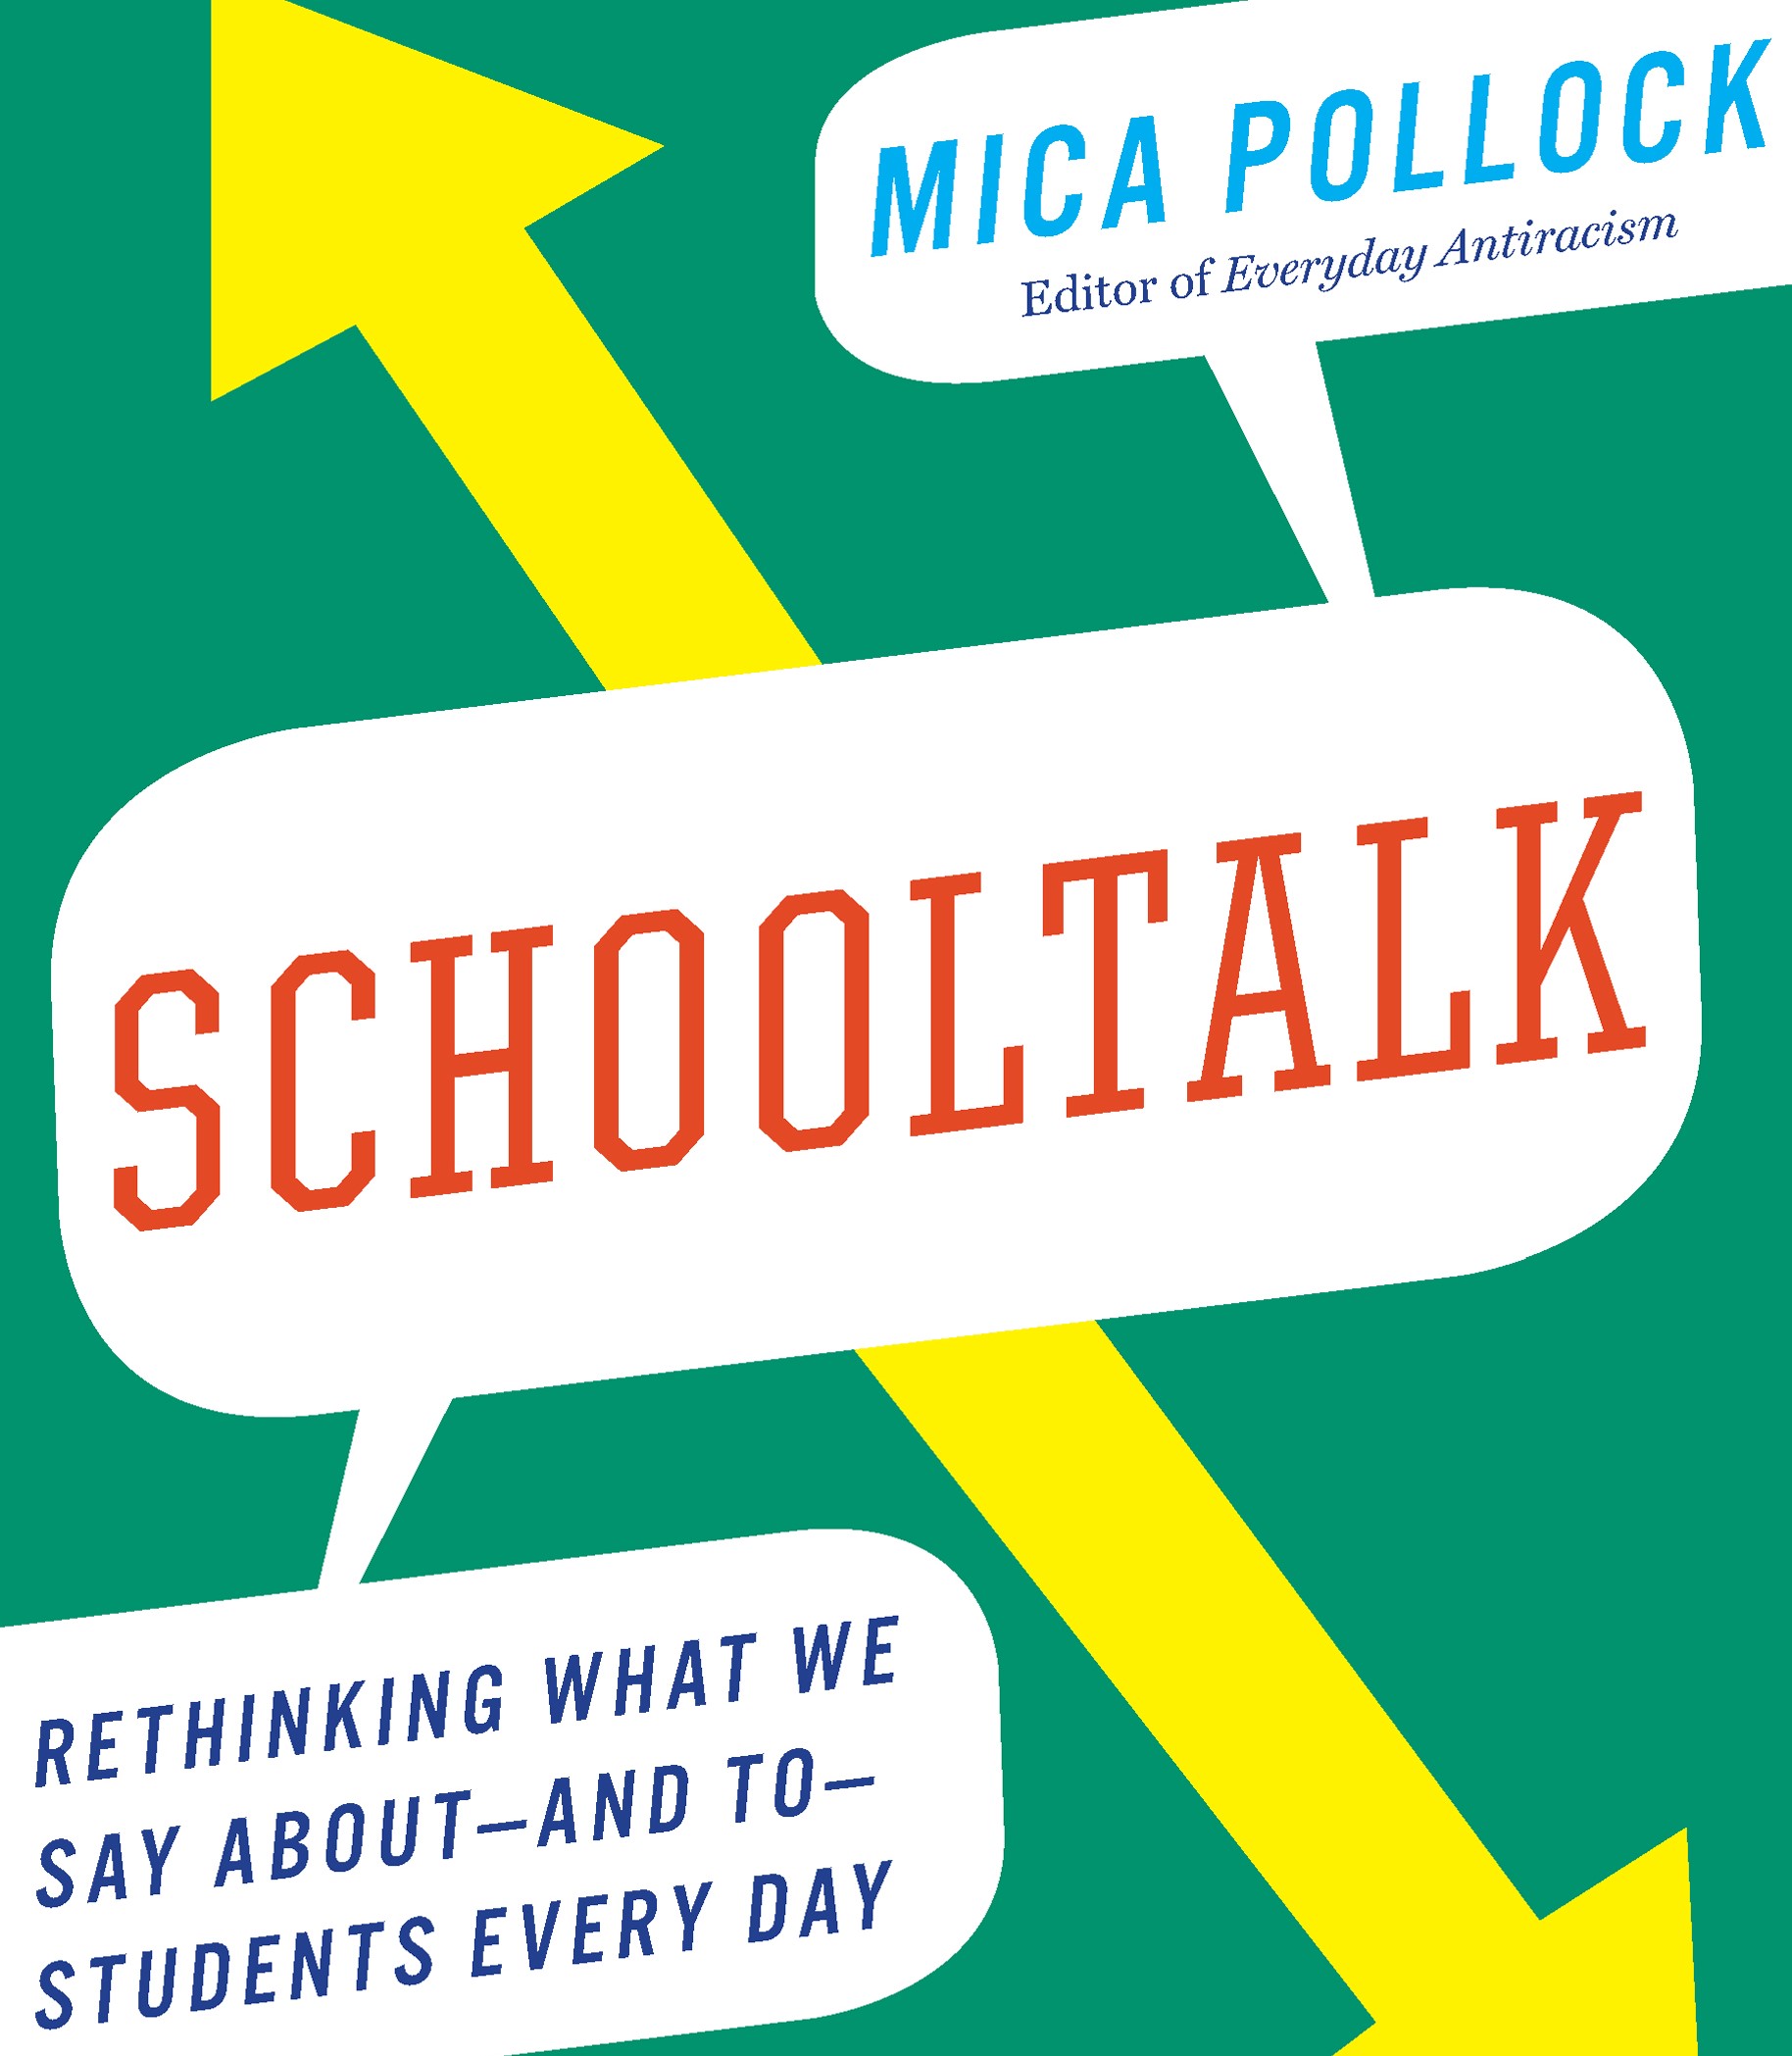 The Gallop Through History from Chapter 1 of Schooltalk